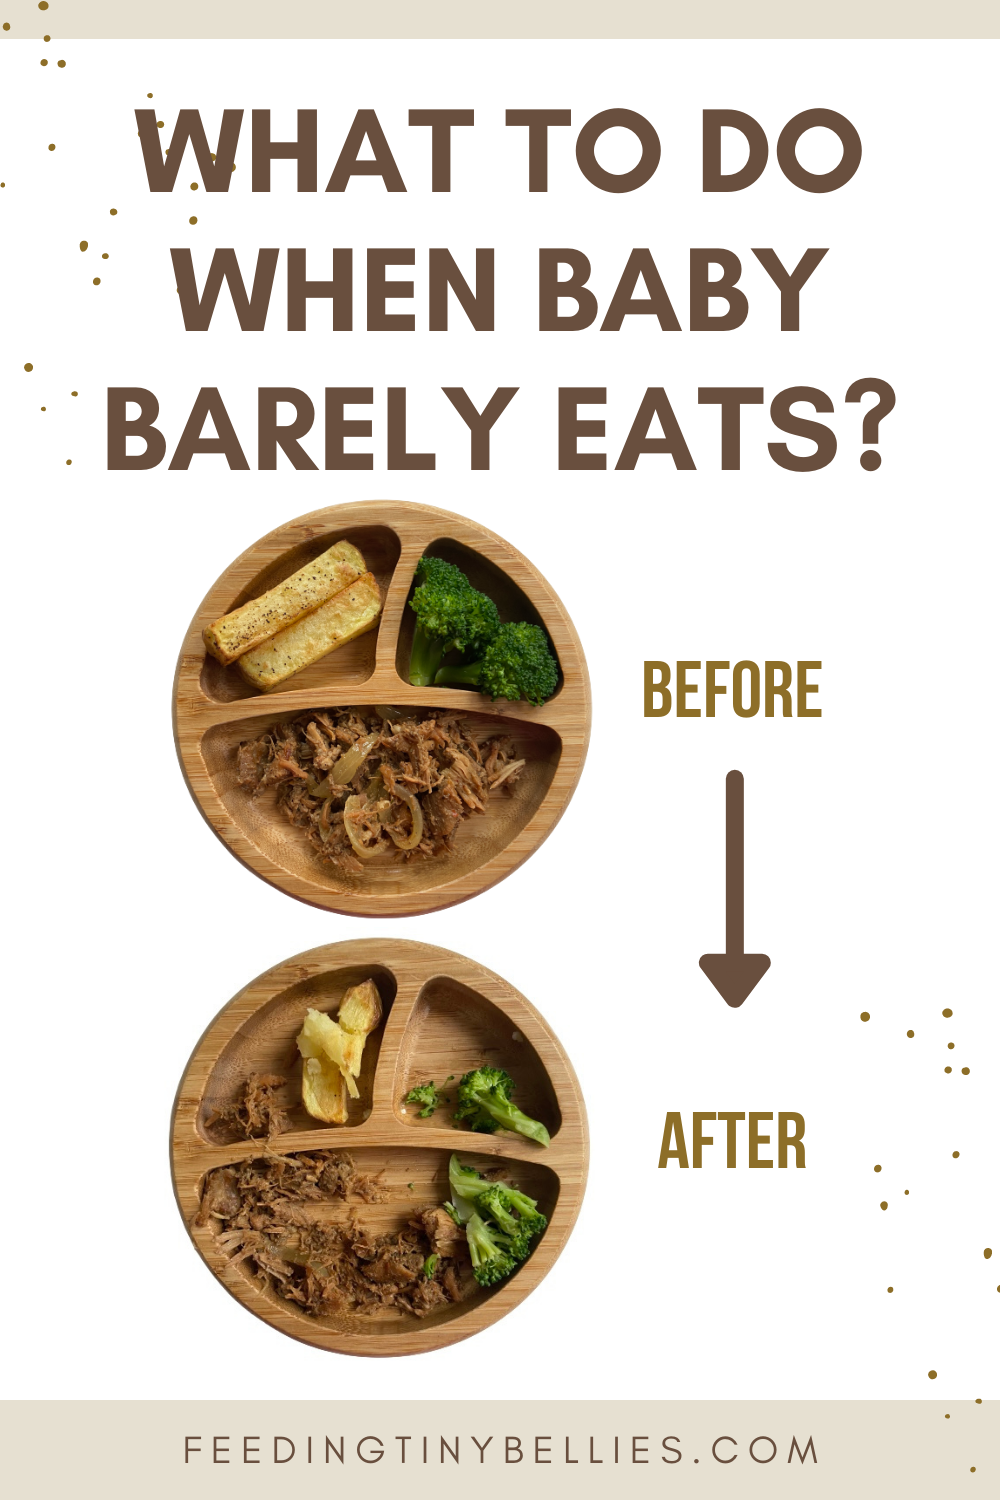 What to do when baby barely eats a meal?